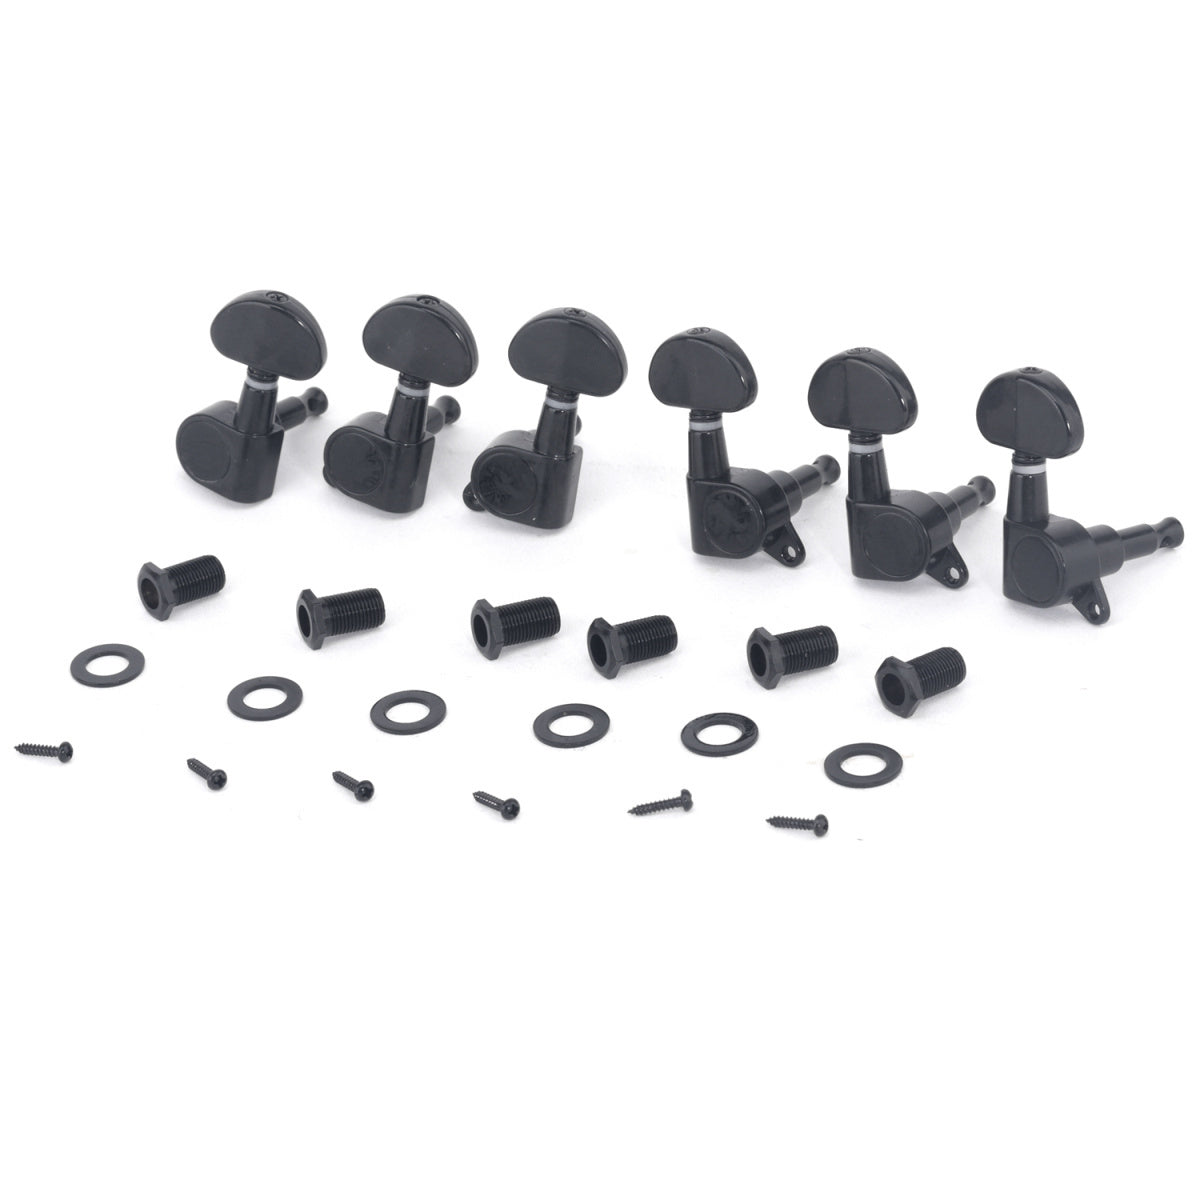 Musiclily Pro 3x3 Sealed Guitar Tuners Tuning Pegs Keys Machine Heads Set for Les Paul Style Guitar, Half Moon Button Black